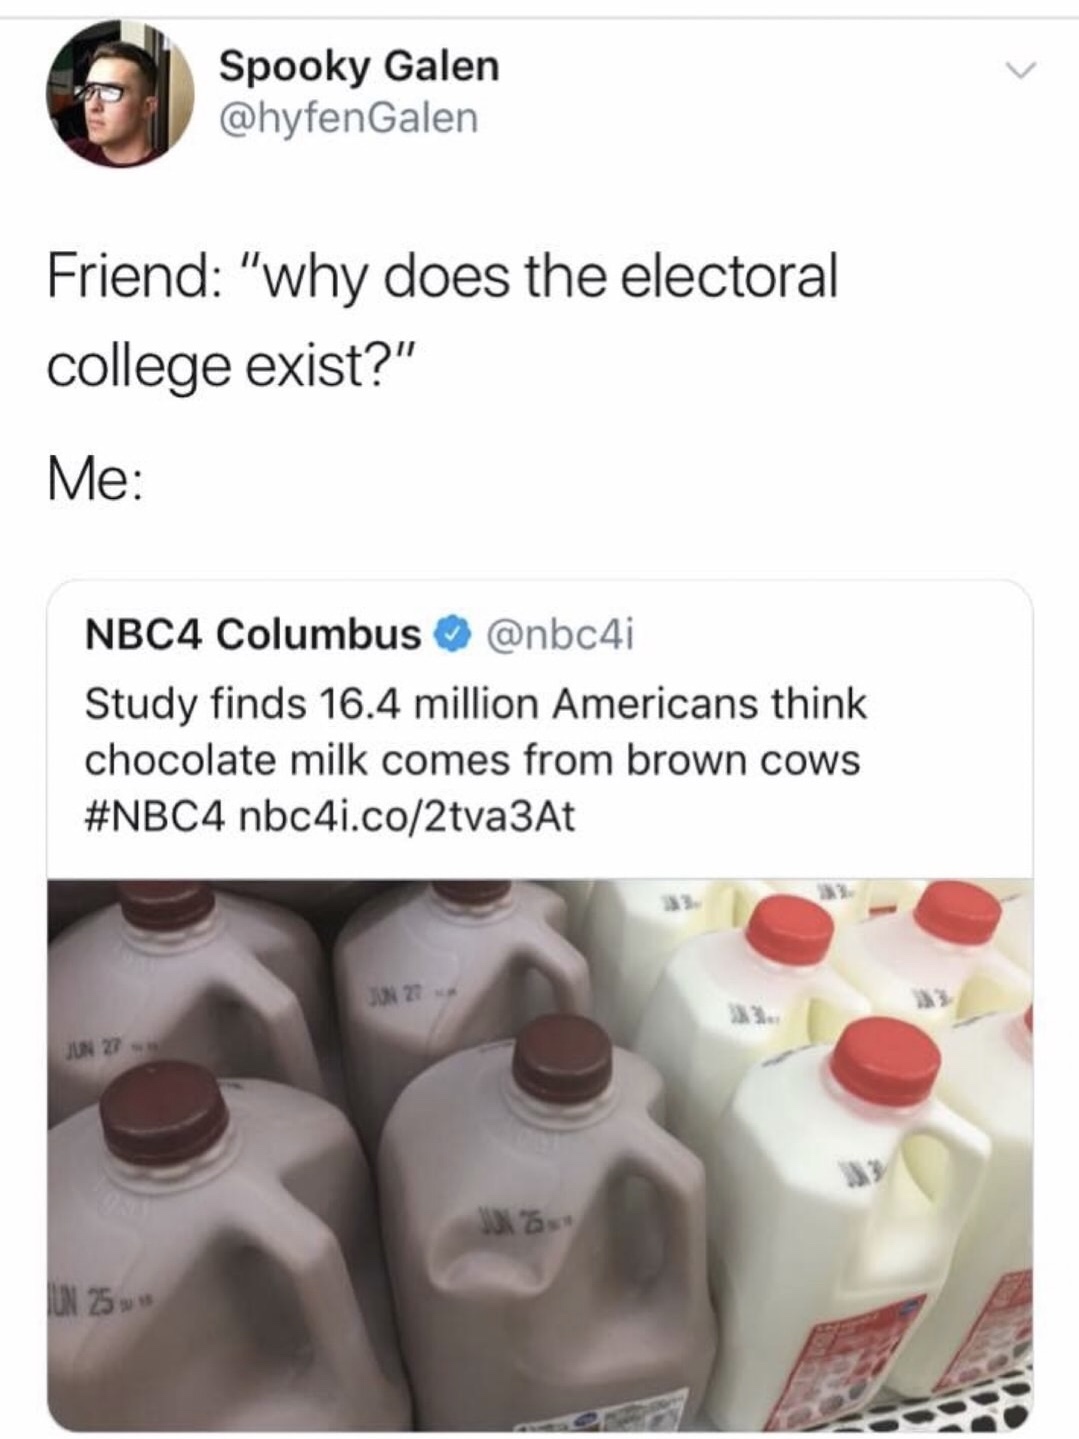 americans chocolate milk - Spooky Galen Friend "why does the electoral college exist?" Me NBC4 Columbus Study finds 16.4 million Americans think chocolate milk comes from brown cows nbc4i.co2tva3At Onze Jun 27 Ju Un 25 w